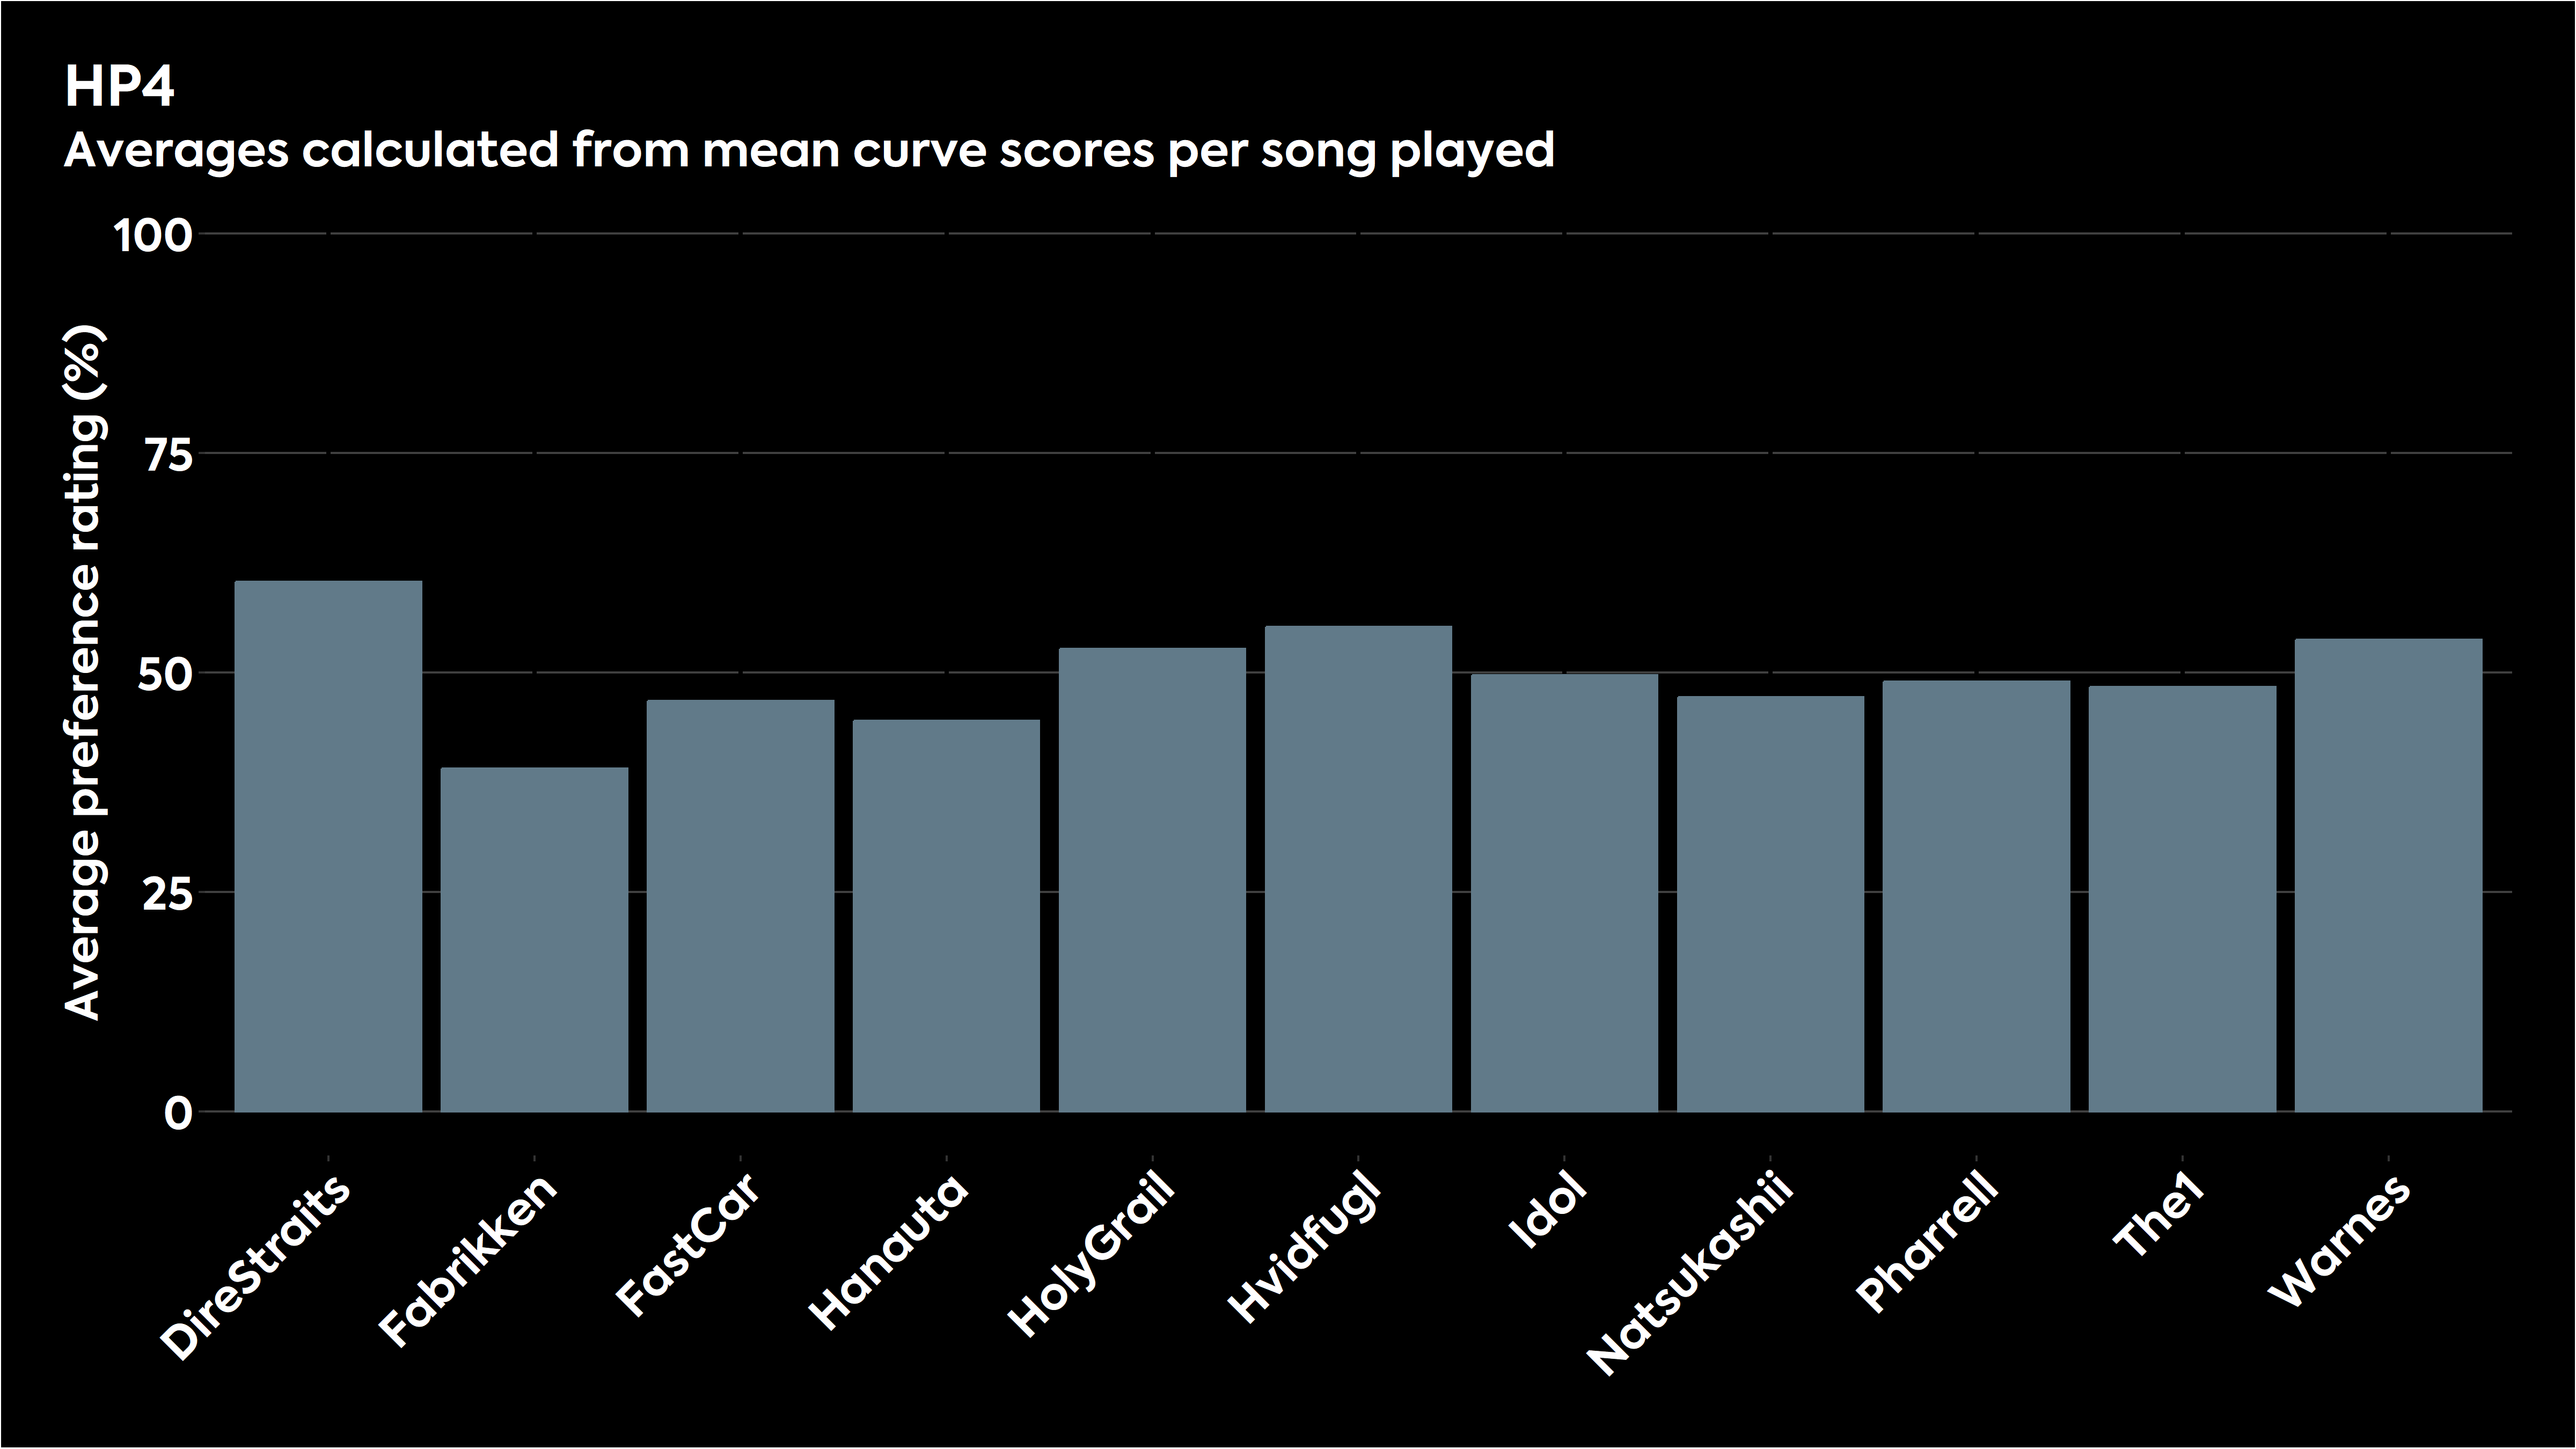 Bar chart showing how the various stimuli were judged for HP4 in listening tests.